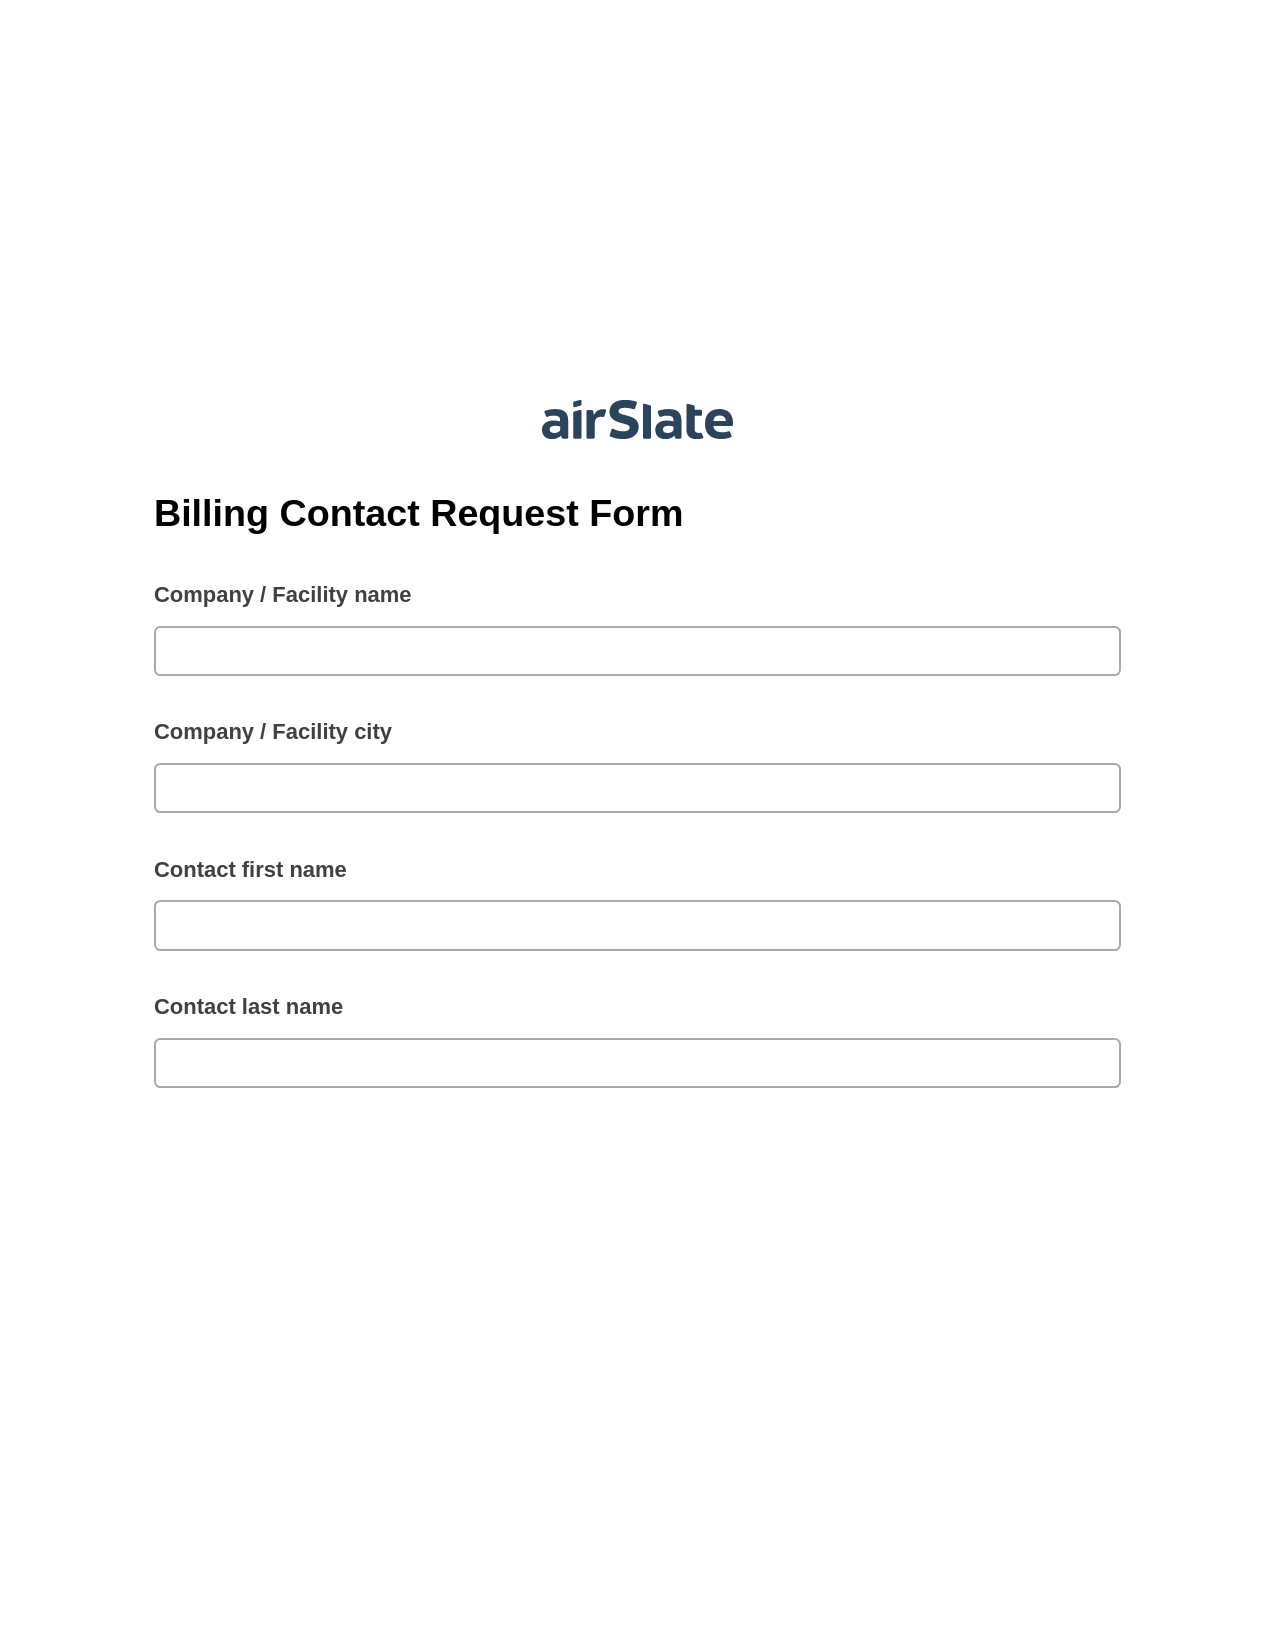 Billing Contact Request Form Pre-fill from Excel Spreadsheet Bot, SendGrid send Campaign bot, Email Notification Postfinish Bot